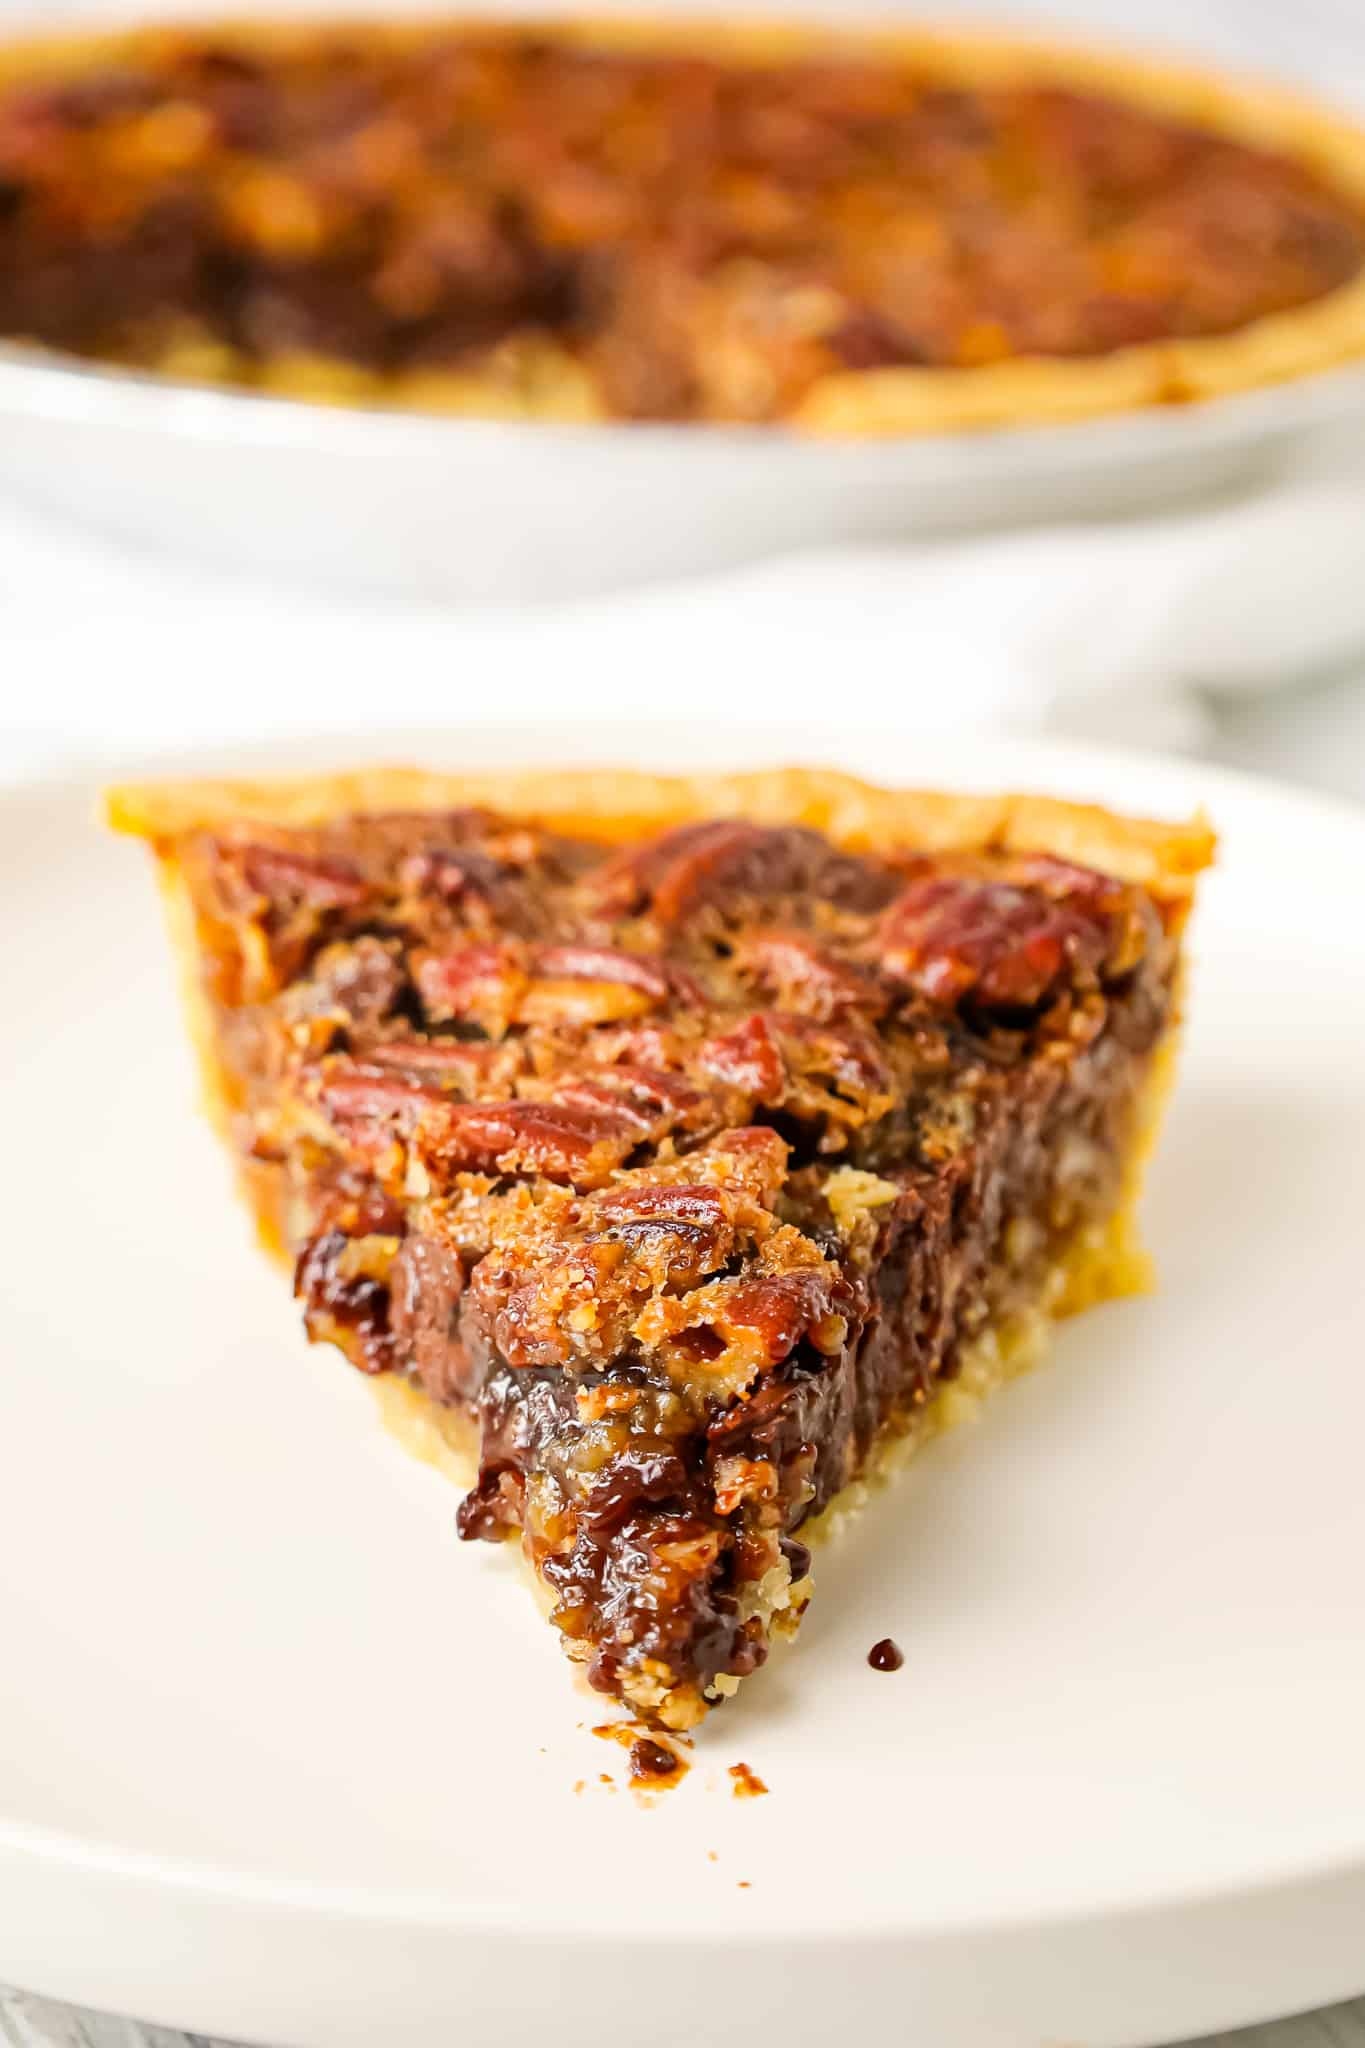 Chocolate Chip Pecan Pie is a decadent chocolate and caramel pie loaded with pecans.